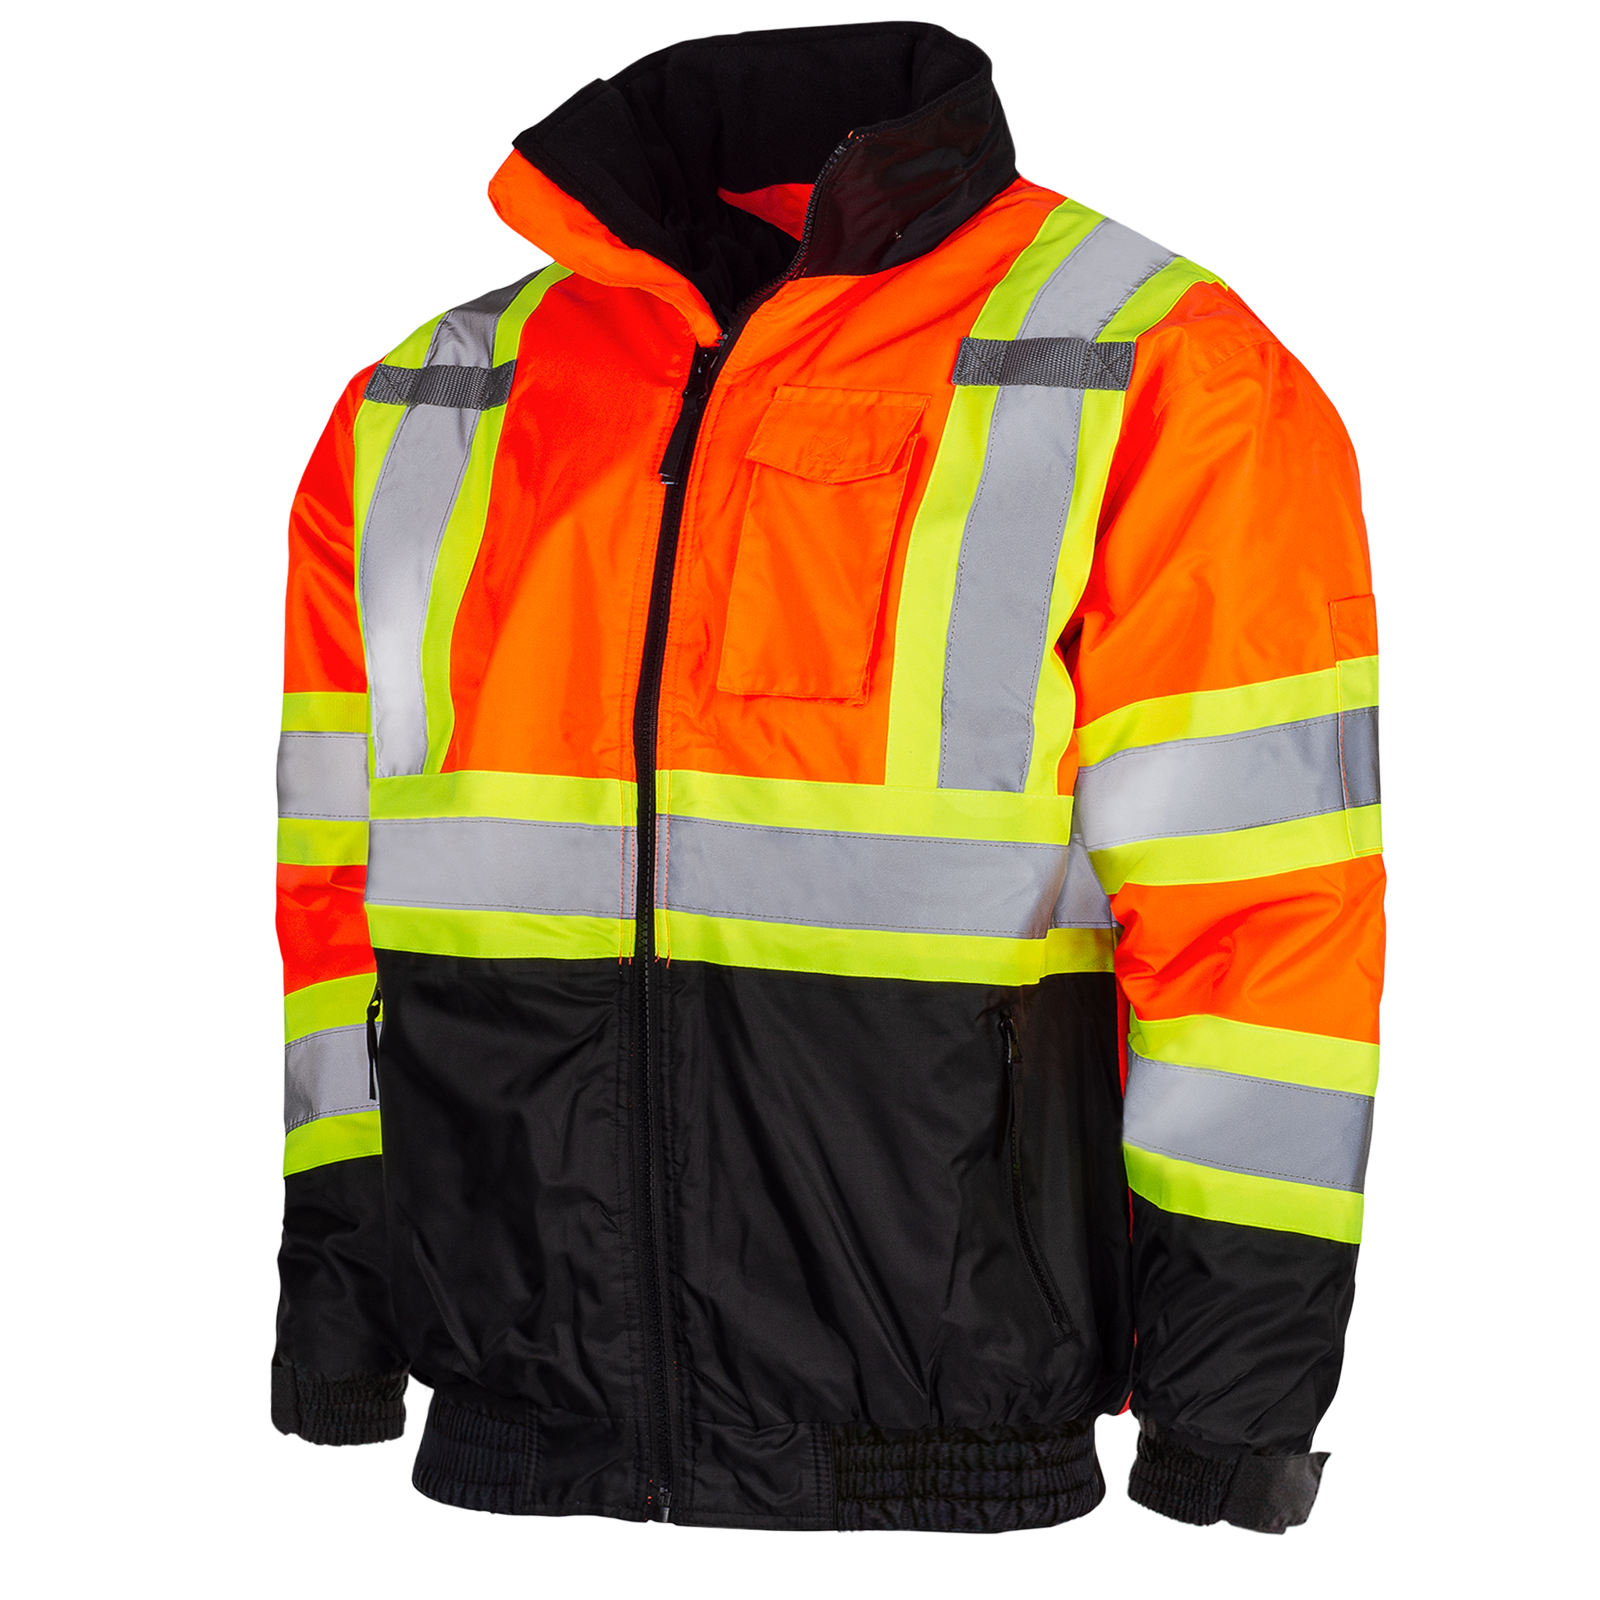 Diagonal view of the orange and yellow JORESTECH Hi-vis two tone safety bomber jacket with reflective stripes and black bottom